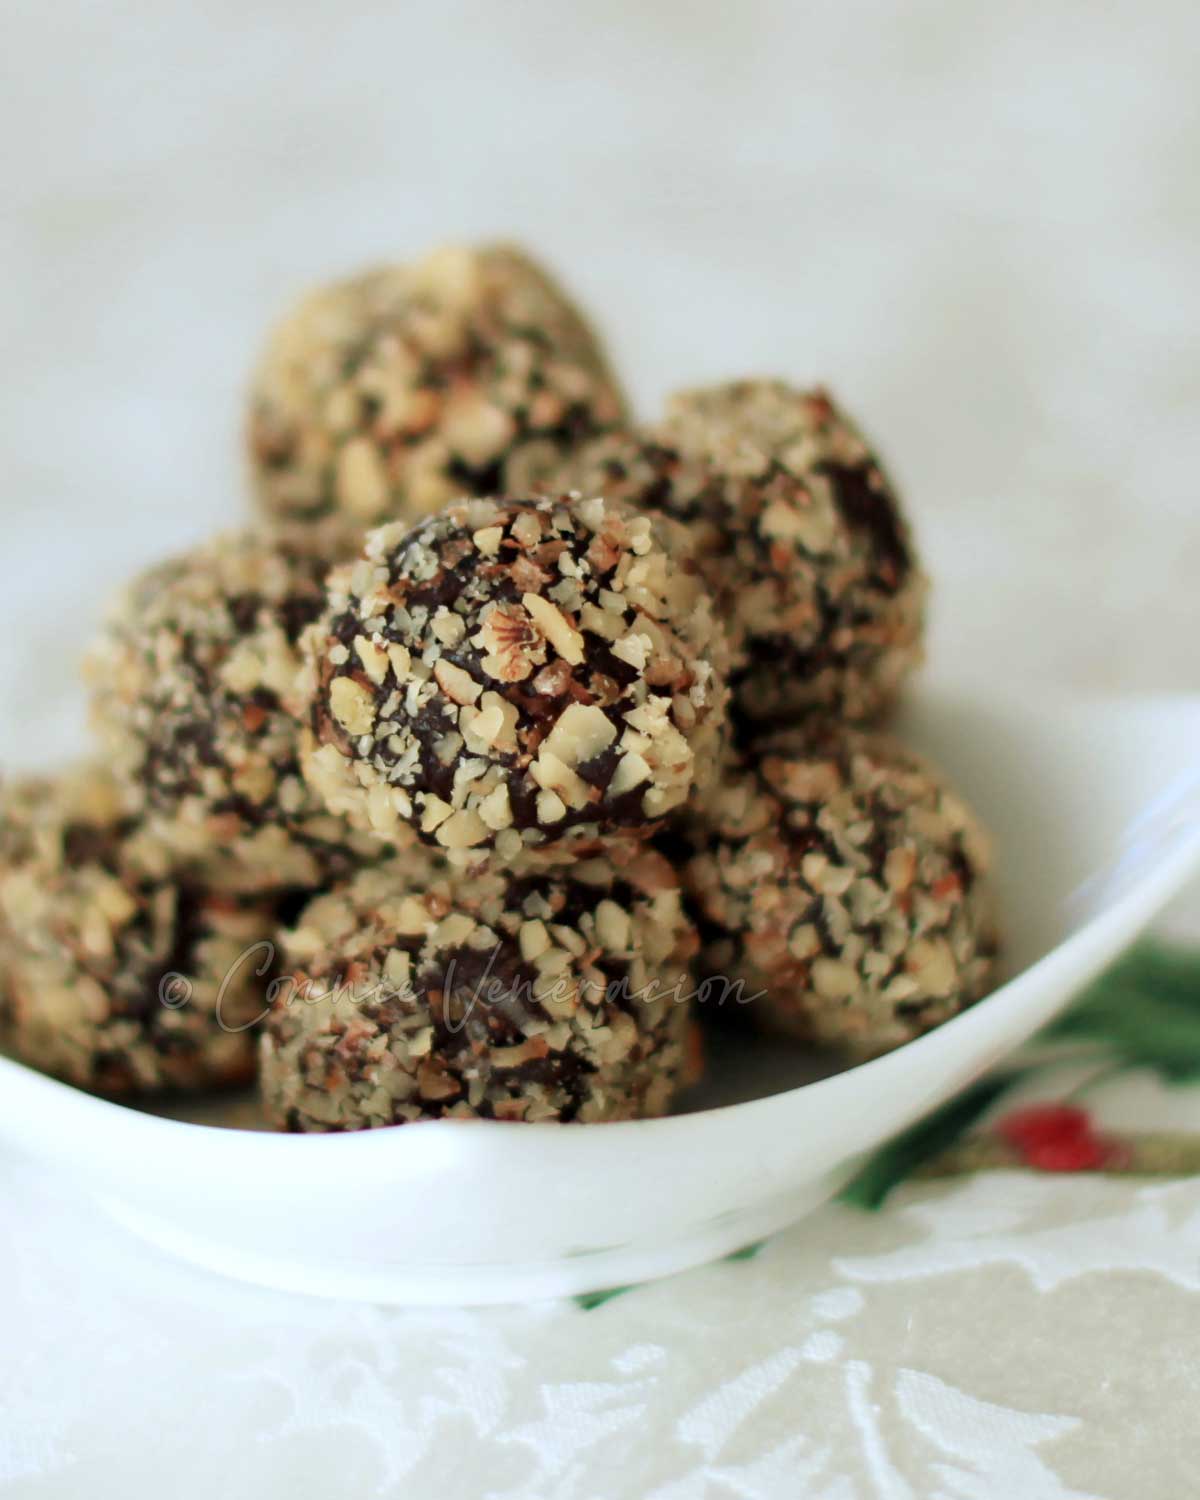 Dark chocolate truffles covered with crushed nuts